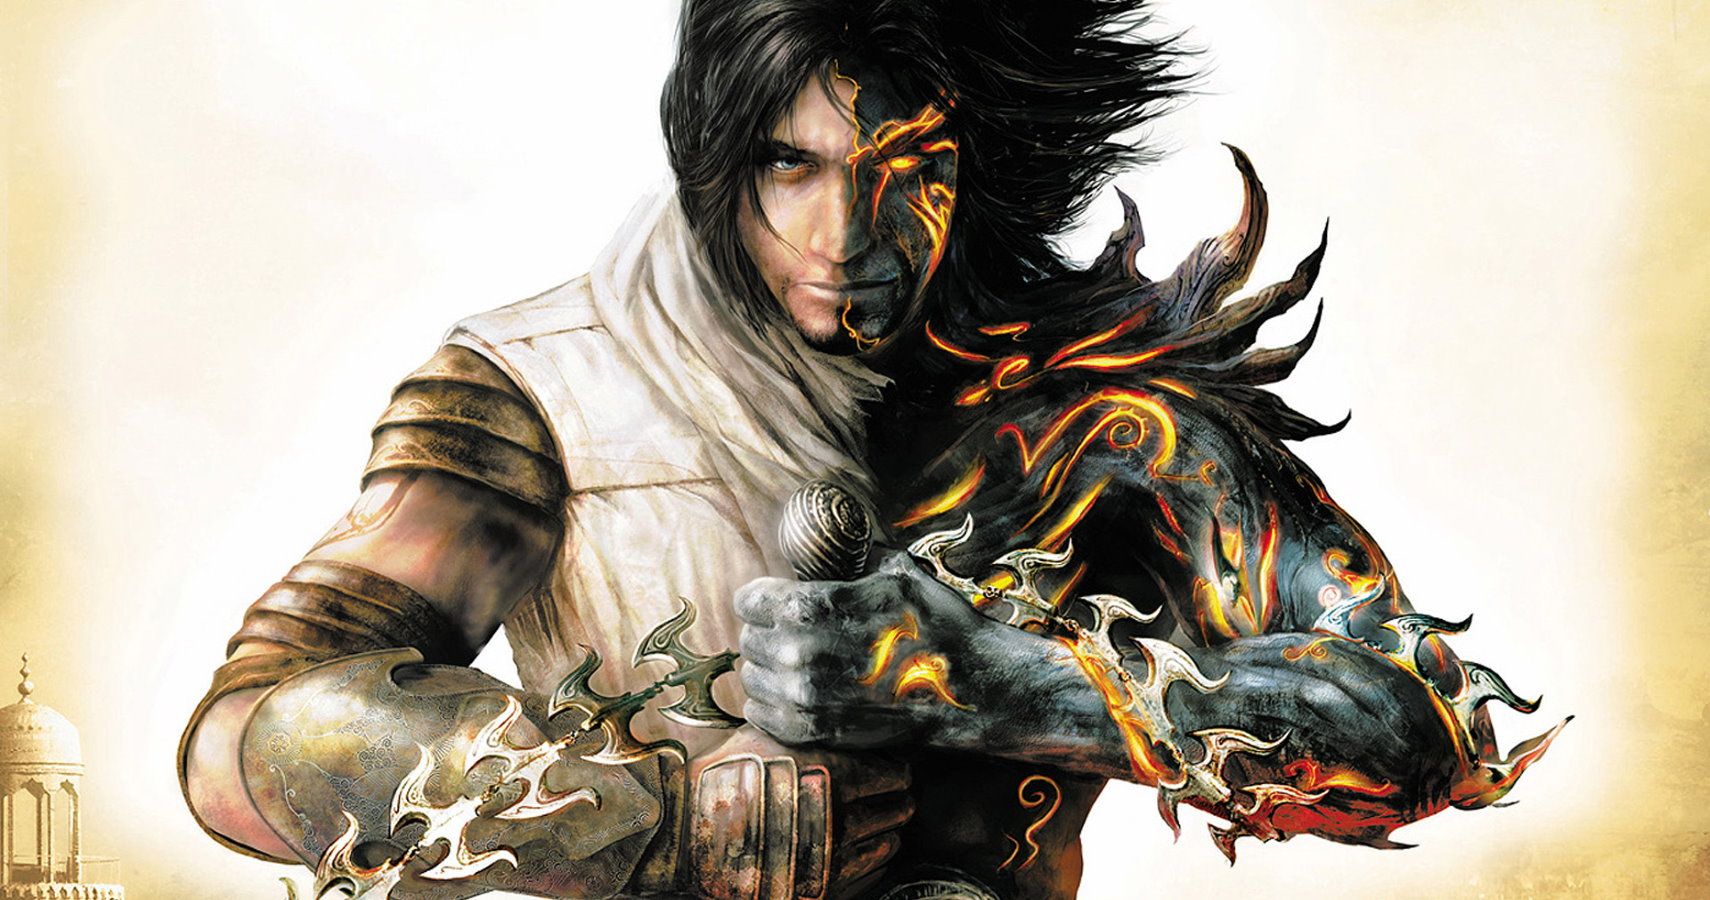 Ubisoft's Prince of Persia Remake Coming to PS4 and Nintendo